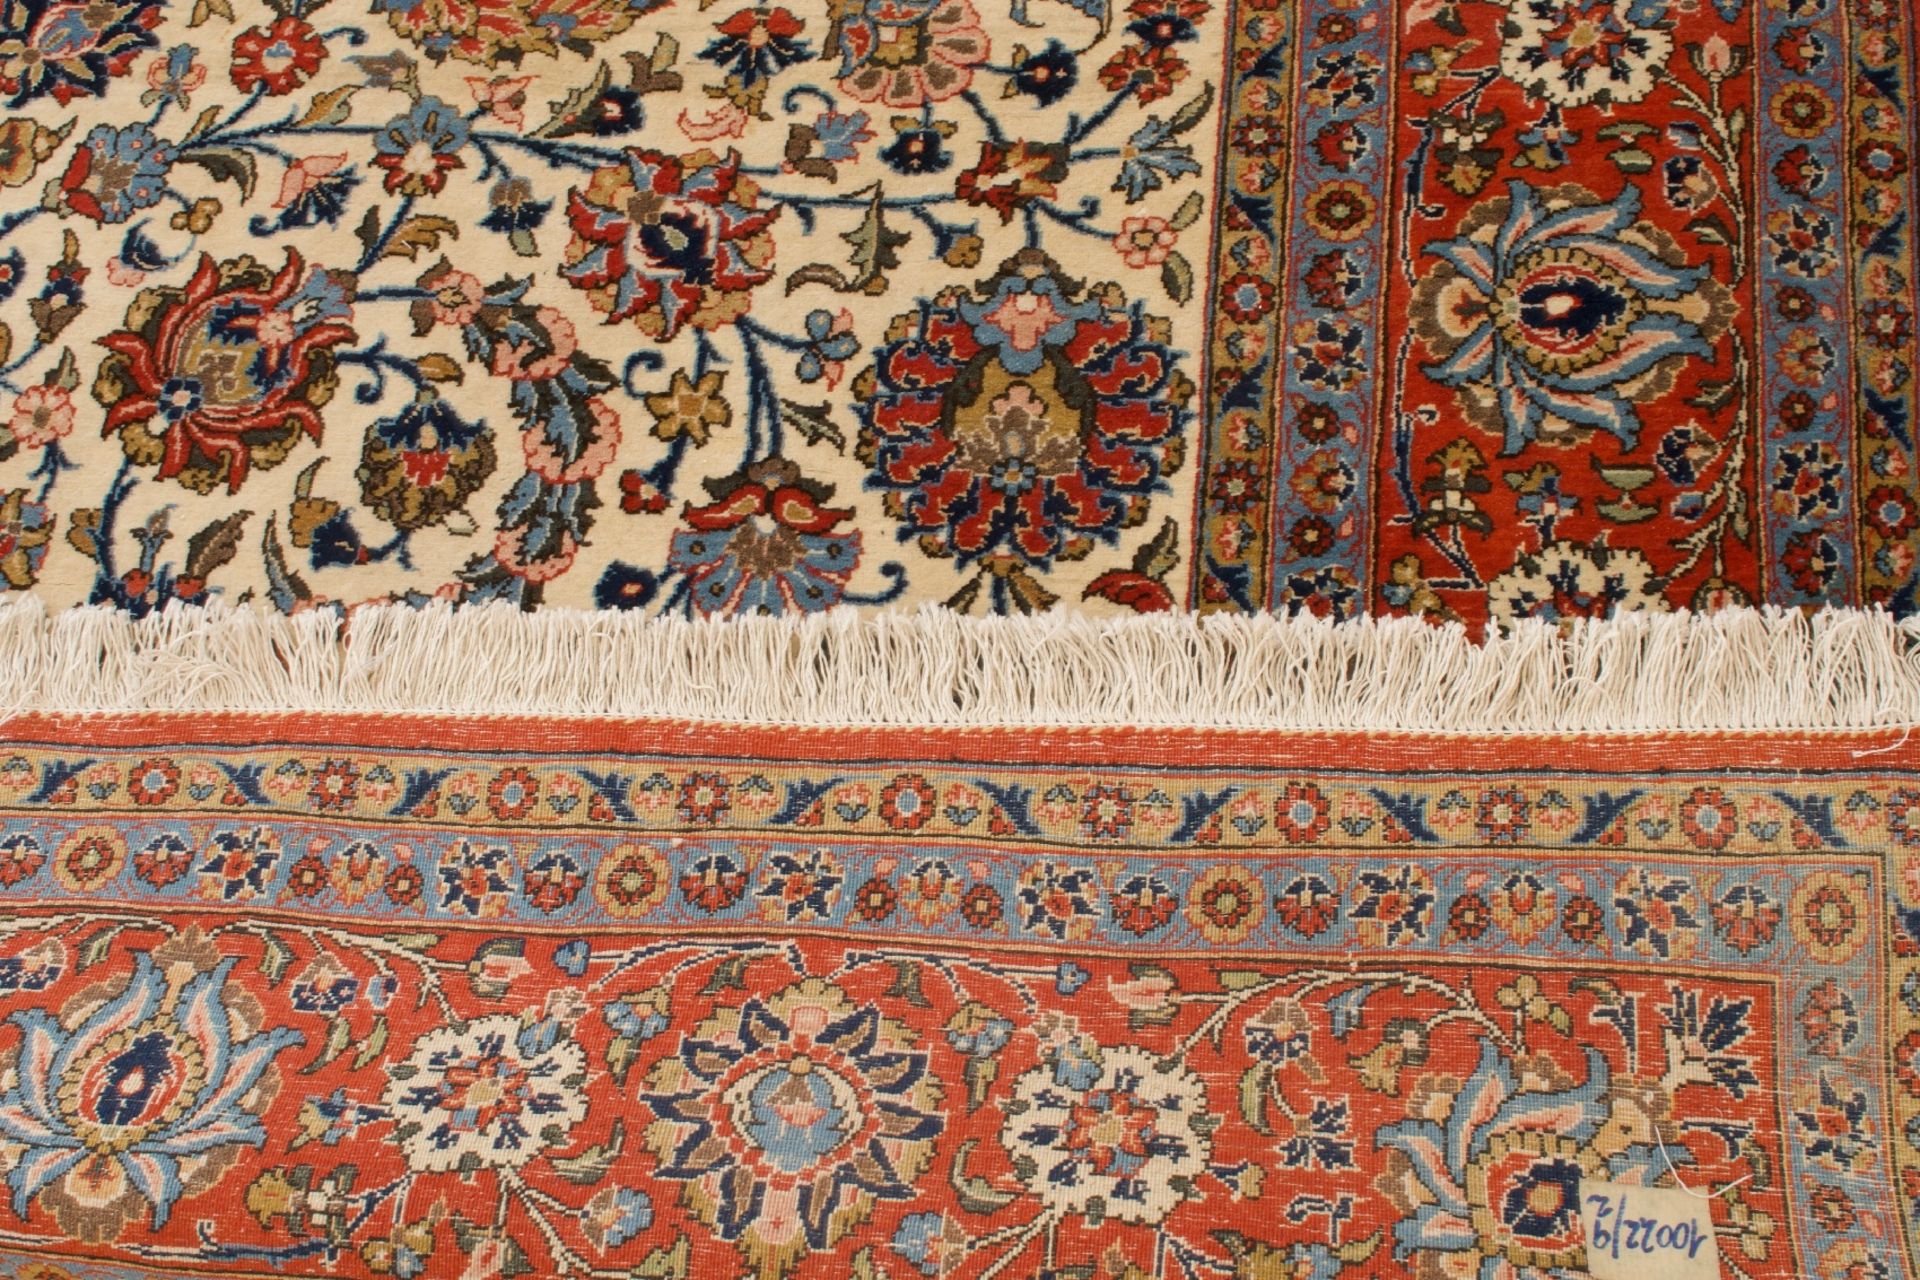 Grosser Isfahan Woll-Teppich | Large Isfahan wool carpet - Image 4 of 5